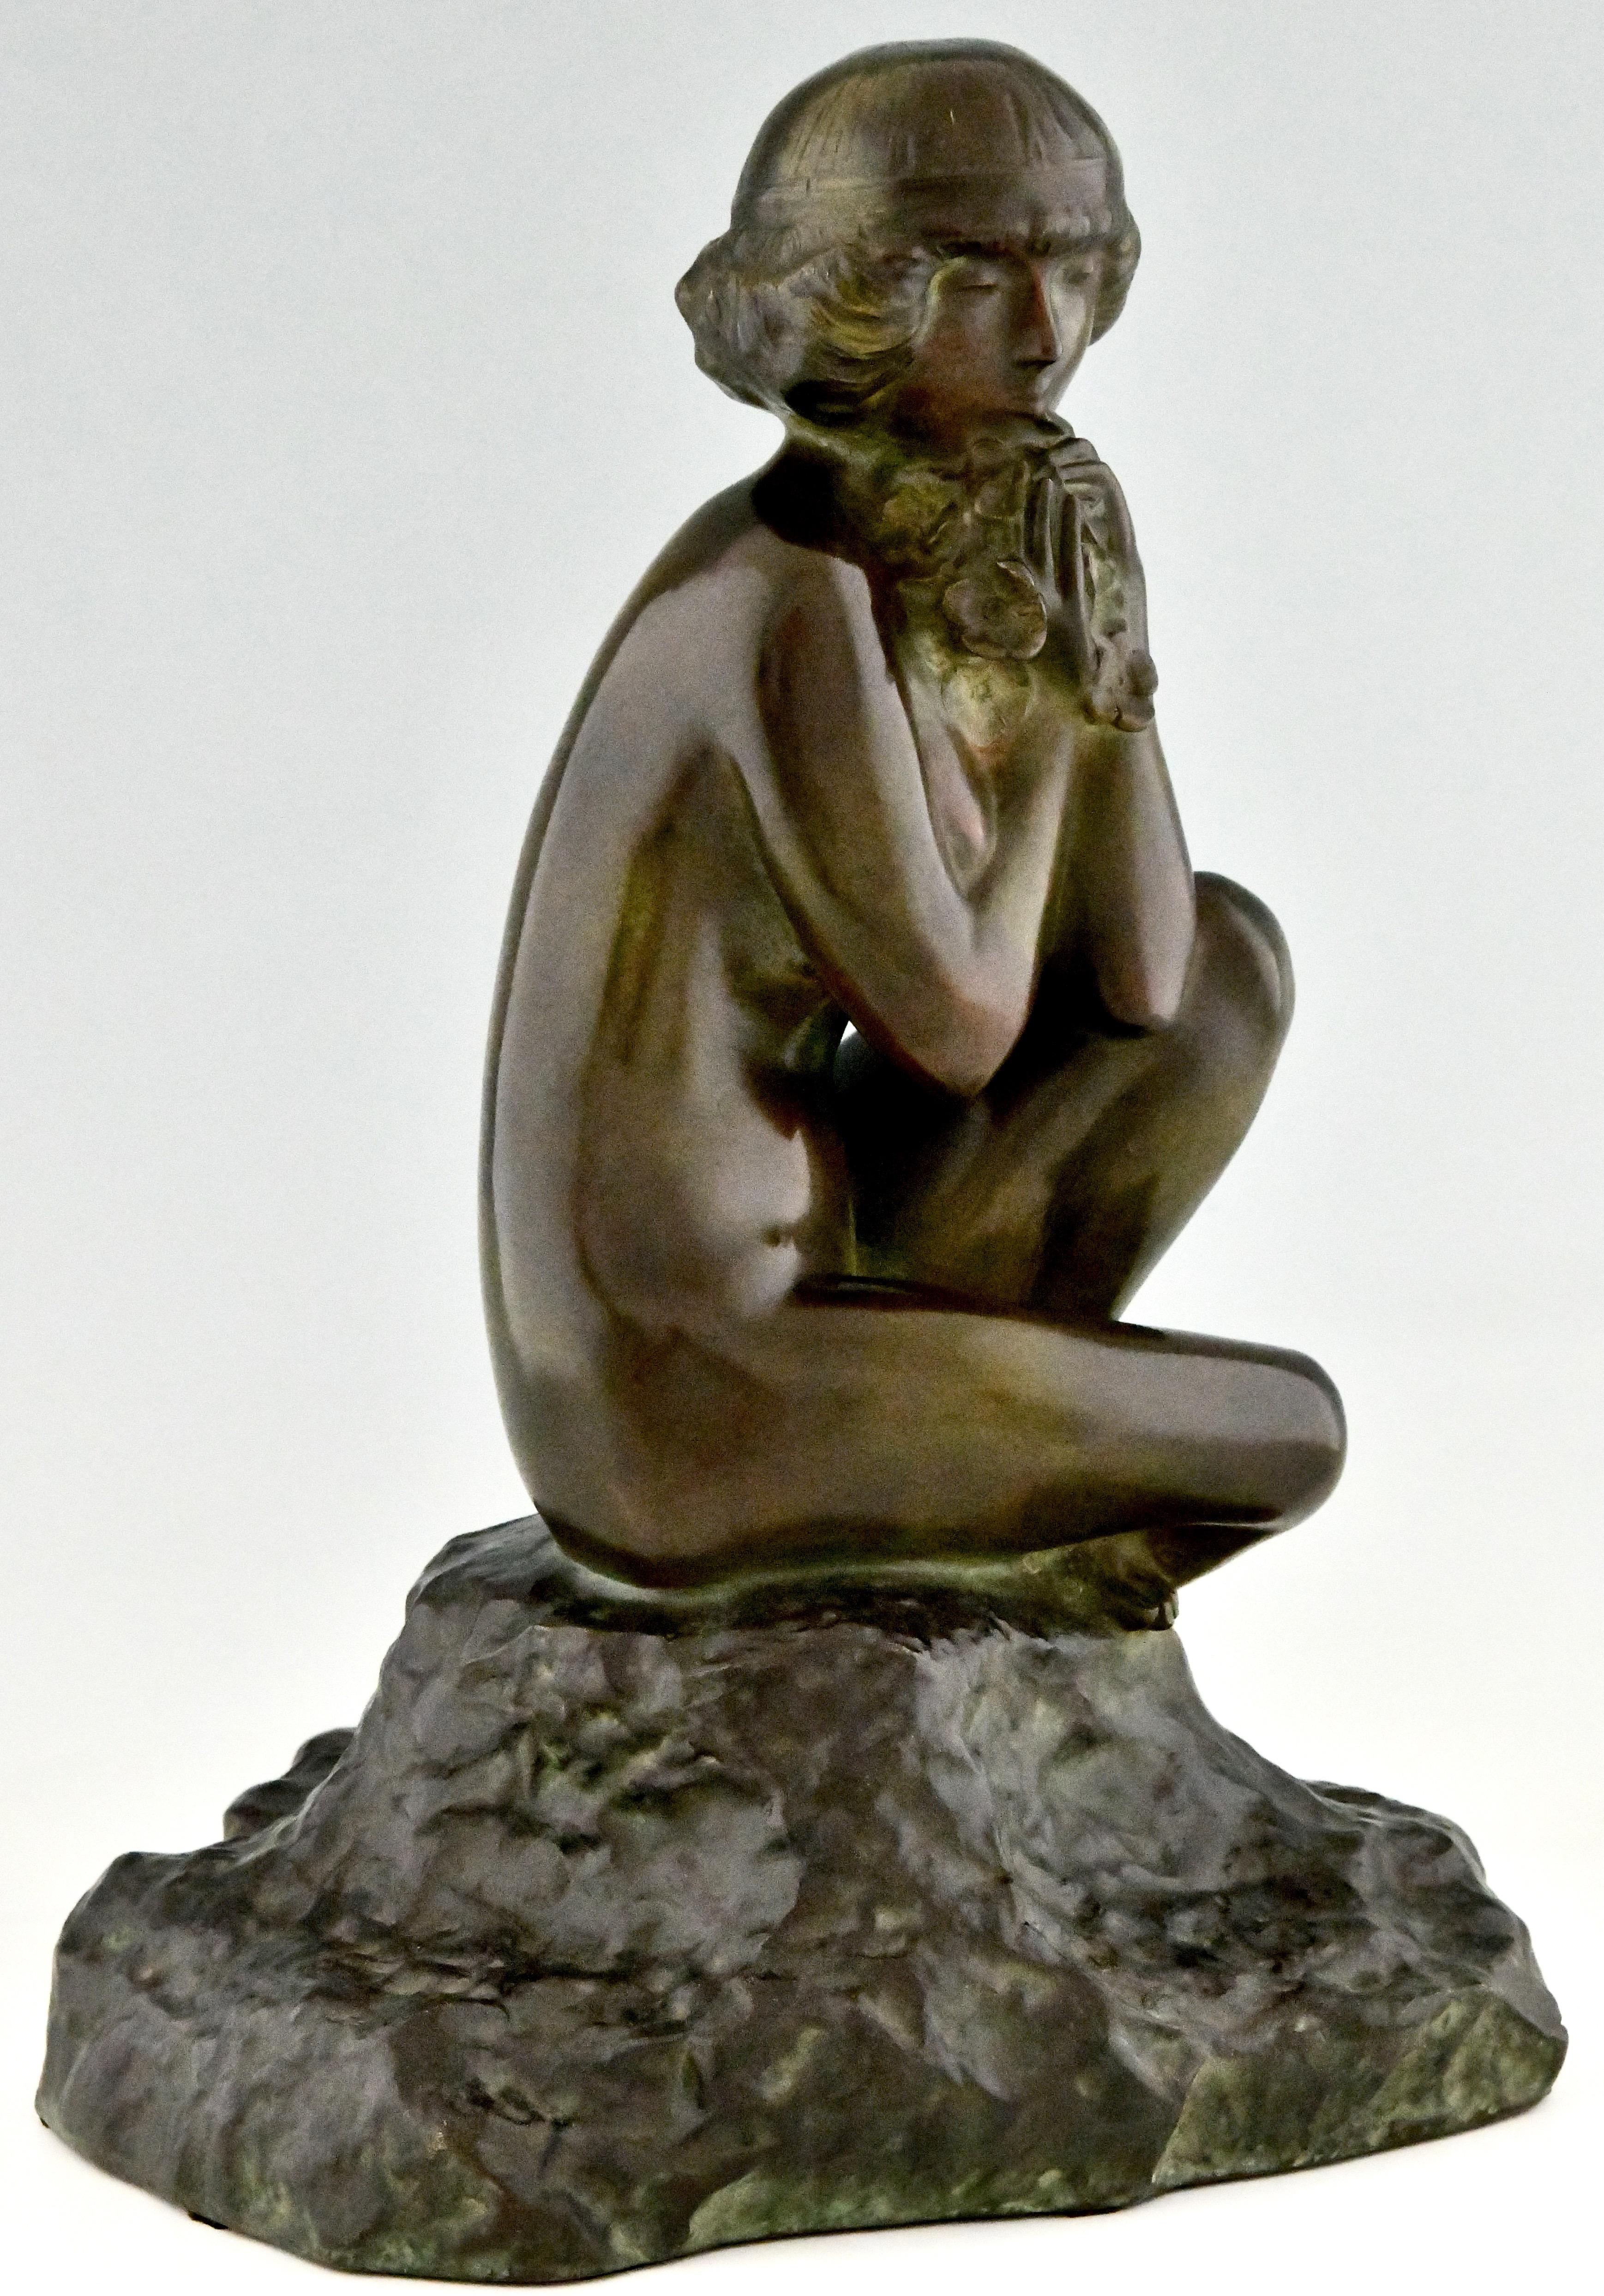 French Art Deco Bronze Sculpture Seated Nude with Flowers by Real Del Sarte, 1920 For Sale